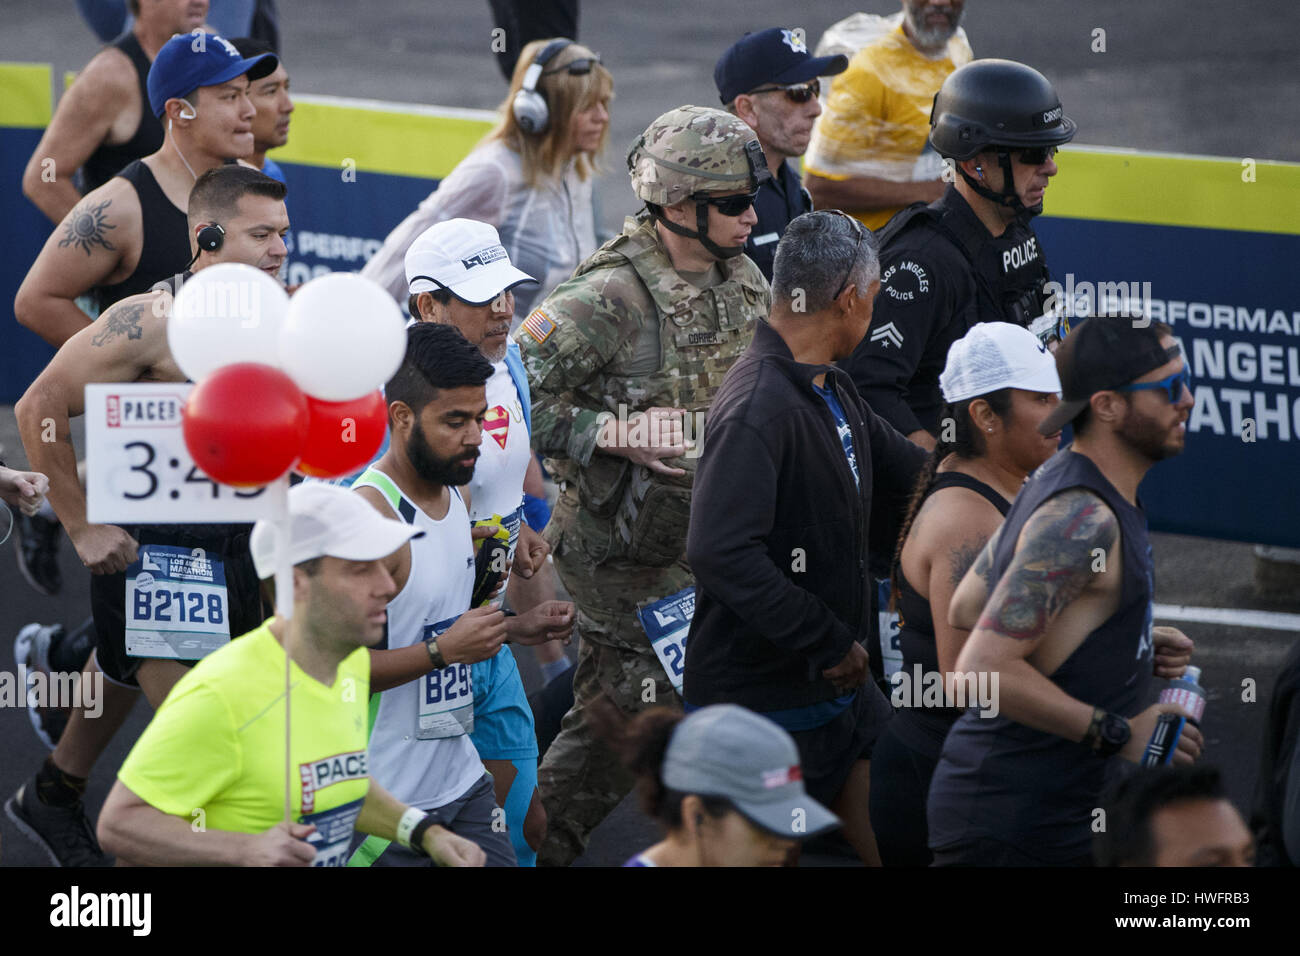 Los Angeles, CA, USA. 19th Mar, 2017. A soldier, LAPD Senior lead Officer Joe Cirrito, right, and other law enforcement officers run in full tactical gear to honor slain Whittier Police Department Officer Keith Boyer wear full tactical gear while running at the start of the 32nd annual Los Angeles Marathon at Dodger Stadium on Sunday morning, March 19, 2017 in Los Angeles, Calif. The 26.2-mile ''Stadium to the Sea'' route begins at Dodger Stadium and ends at Ocean and California avenues in Santa Monica. © 2017 Patrick T. Fallon Credit: Patrick Fallon/ZUMA Wire/Alamy Live News Stock Photo